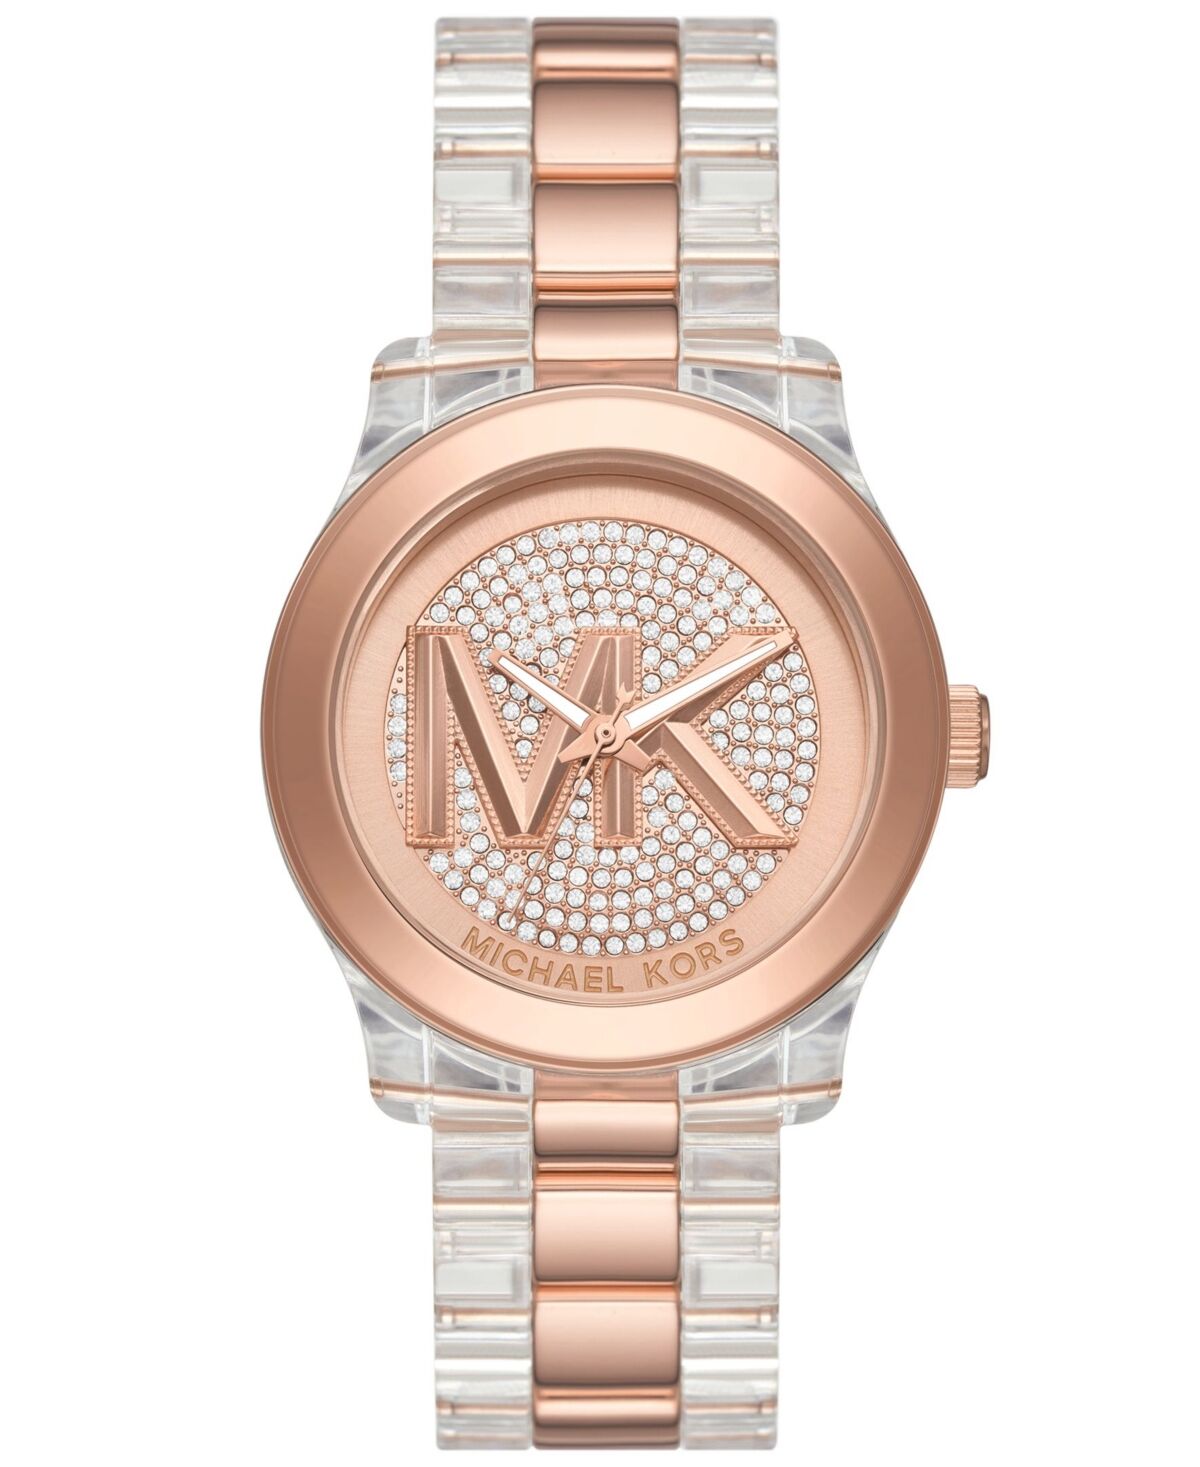 Michael Kors Women's Runway Quartz Three-Hand Clear Castor Oil and Rose Gold-Tone Stainless Steel Watch 38mm - Two-Tone